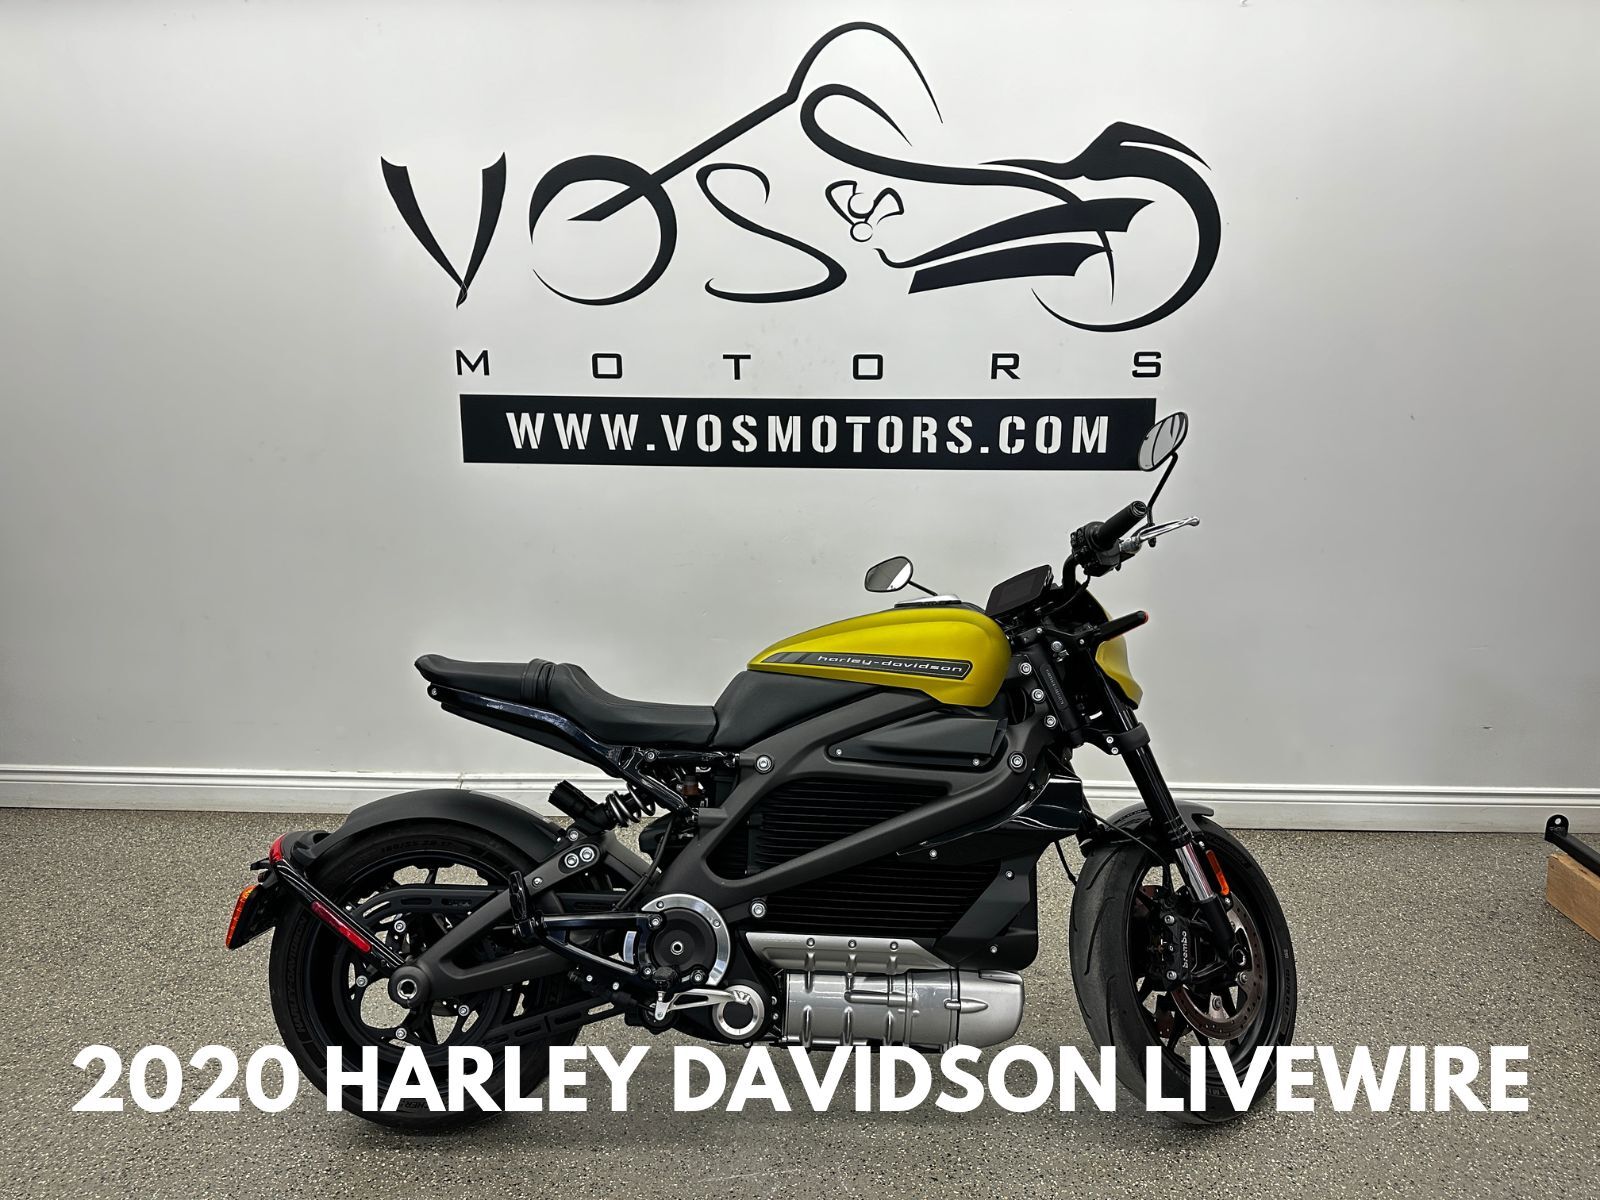 2020 Harley-Davidson LiveWire LiveWire ABS - V5715 - -No Payments for 1 Year**